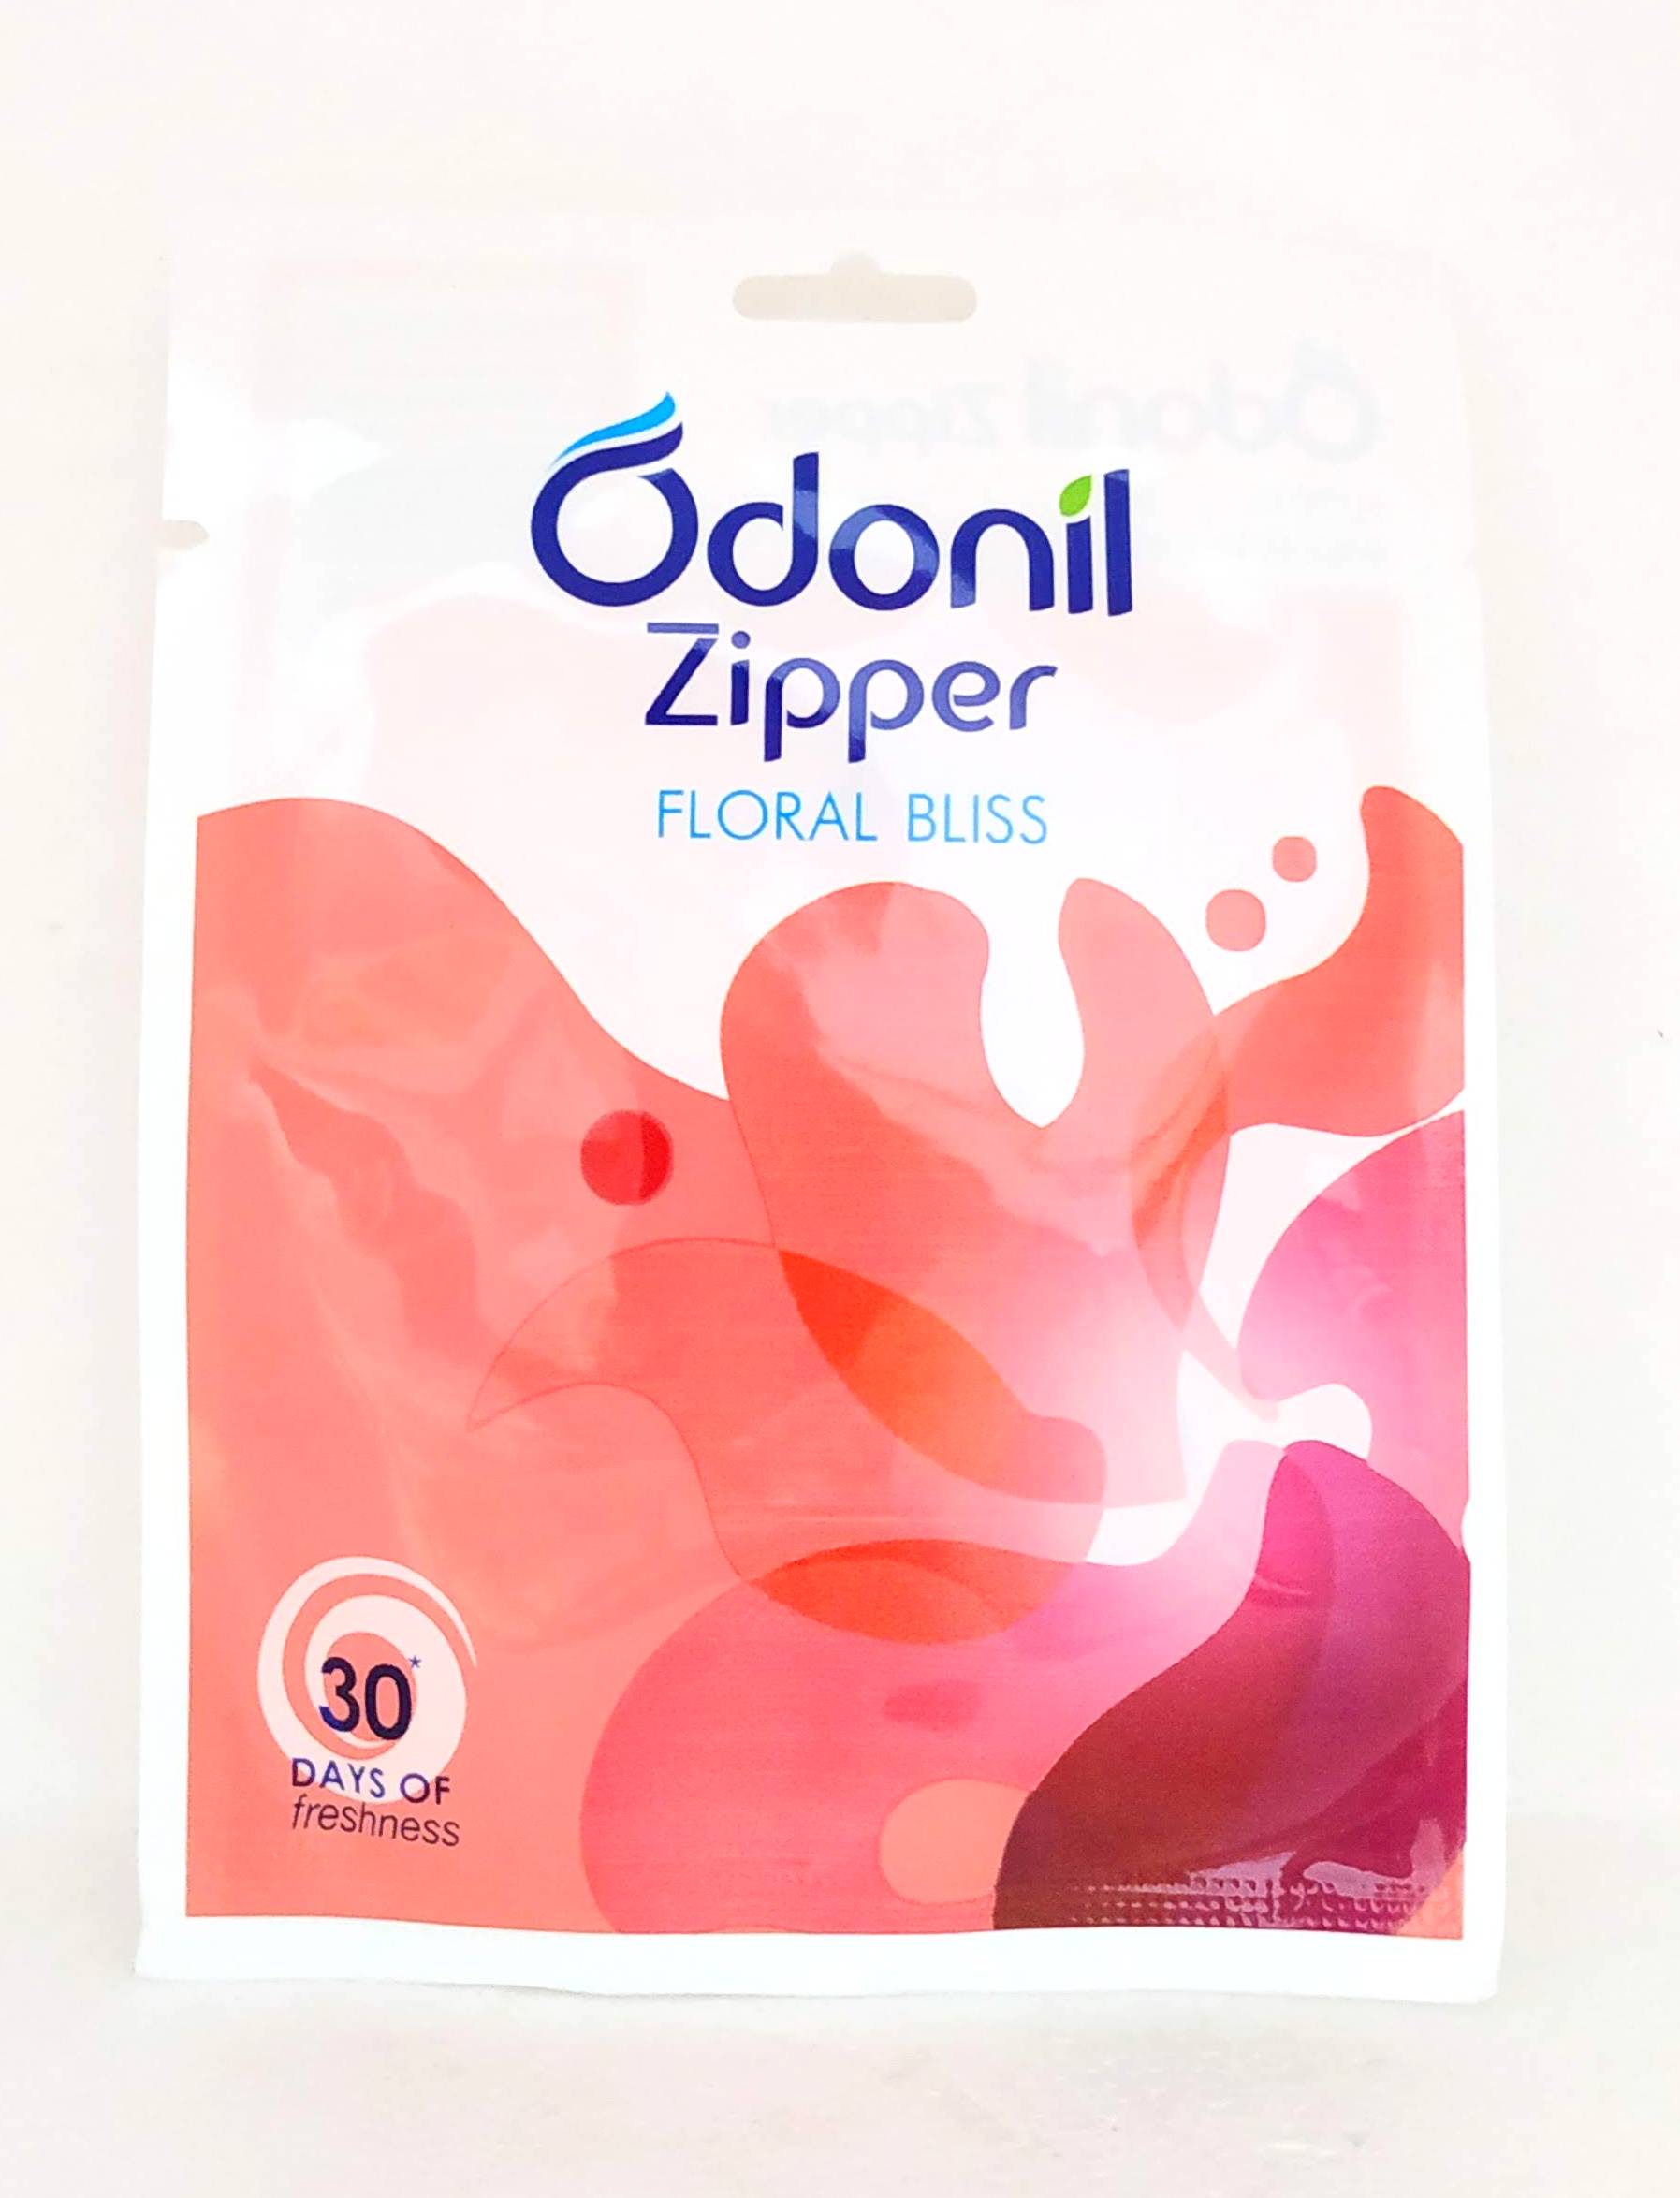 Shop Odonil Zipper - Floral Bliss at price 55.00 from Dabur Online - Ayush Care